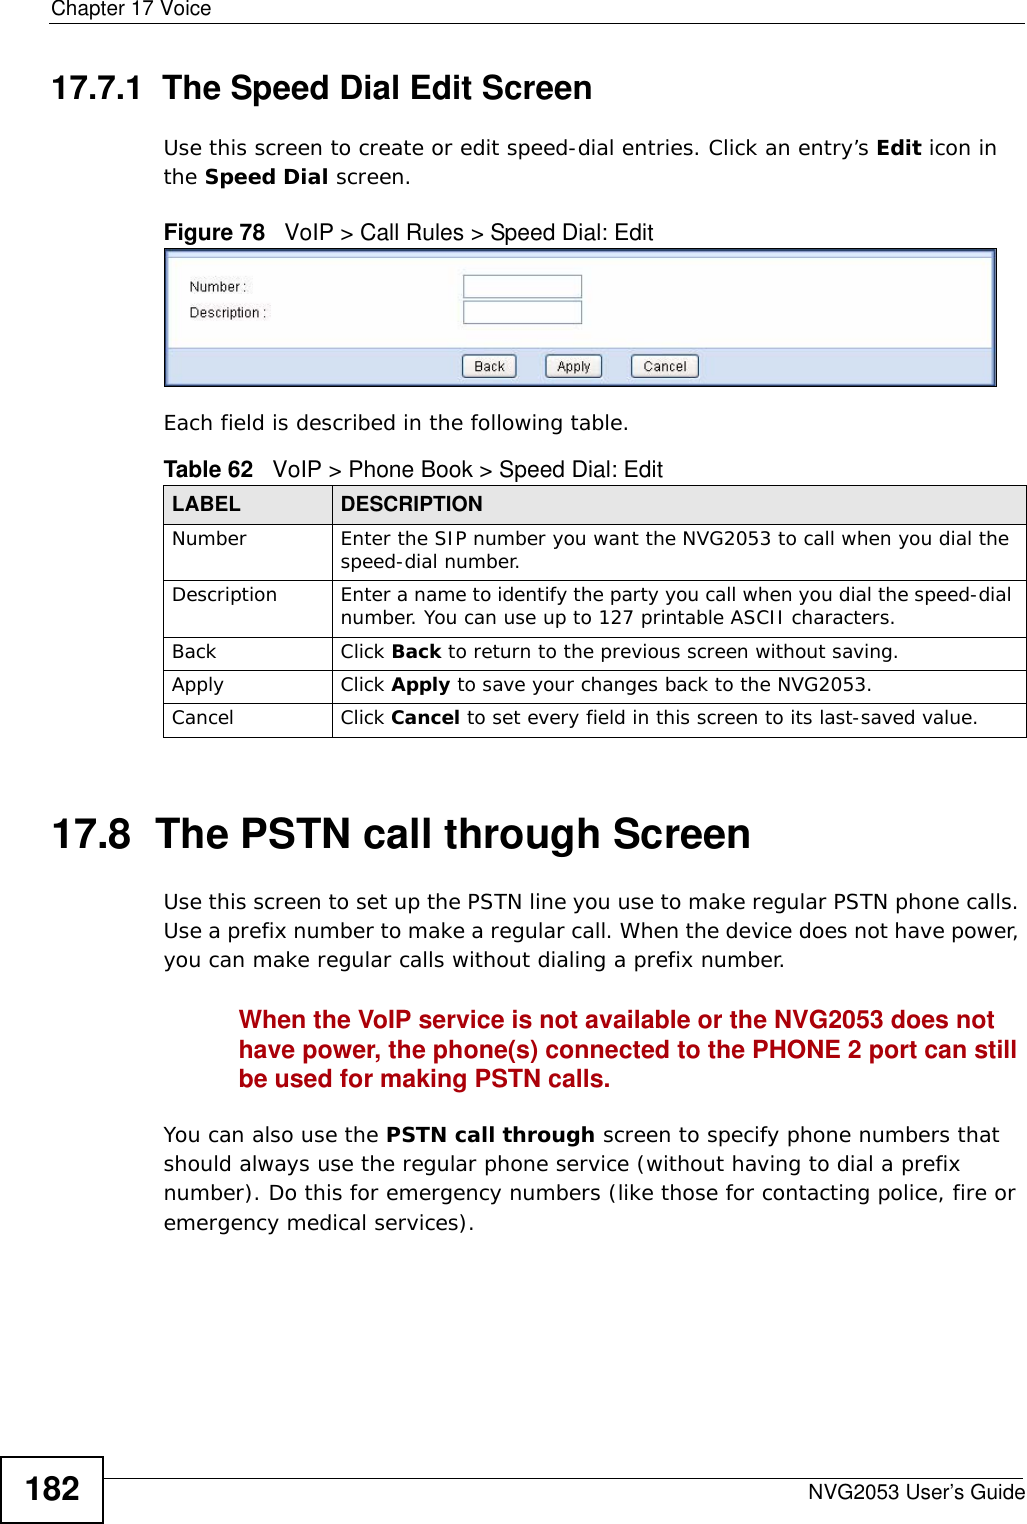 Chapter 17 VoiceNVG2053 User’s Guide18217.7.1  The Speed Dial Edit Screen Use this screen to create or edit speed-dial entries. Click an entry’s Edit icon in the Speed Dial screen. Figure 78   VoIP &gt; Call Rules &gt; Speed Dial: EditEach field is described in the following table.17.8  The PSTN call through Screen Use this screen to set up the PSTN line you use to make regular PSTN phone calls. Use a prefix number to make a regular call. When the device does not have power, you can make regular calls without dialing a prefix number.When the VoIP service is not available or the NVG2053 does not have power, the phone(s) connected to the PHONE 2 port can still be used for making PSTN calls. You can also use the PSTN call through screen to specify phone numbers that should always use the regular phone service (without having to dial a prefix number). Do this for emergency numbers (like those for contacting police, fire or emergency medical services).Table 62   VoIP &gt; Phone Book &gt; Speed Dial: EditLABEL DESCRIPTIONNumber Enter the SIP number you want the NVG2053 to call when you dial the speed-dial number.Description Enter a name to identify the party you call when you dial the speed-dial number. You can use up to 127 printable ASCII characters.Back Click Back to return to the previous screen without saving.Apply Click Apply to save your changes back to the NVG2053.Cancel Click Cancel to set every field in this screen to its last-saved value.